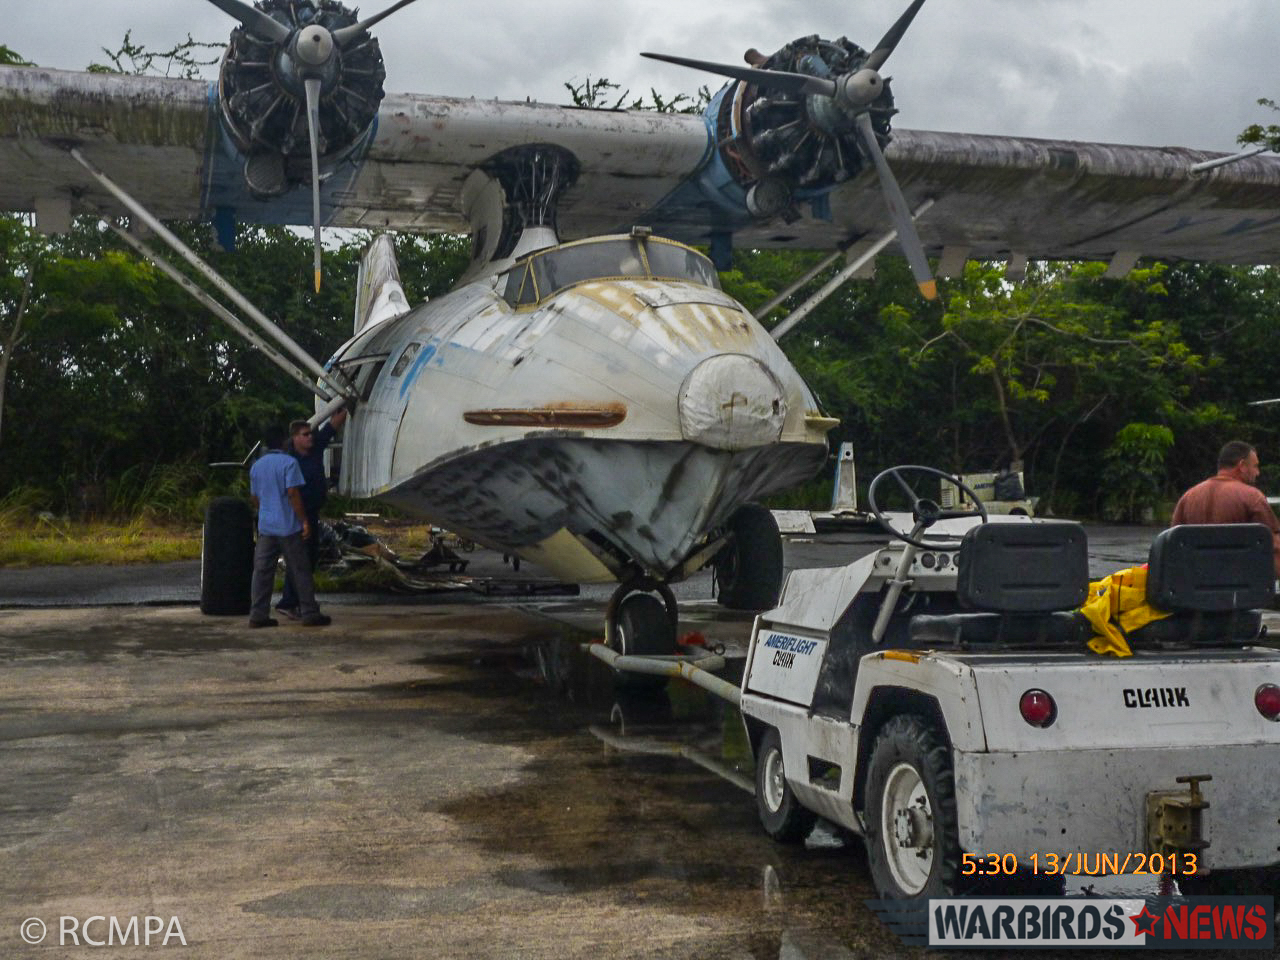 The Catalina's stripped-out hulk in Puerto Rico back in June, 2013. The immensity of the project, even for a static restoration, should be clearly apparent in this image. (photo RCMPA via Phil Buckley)